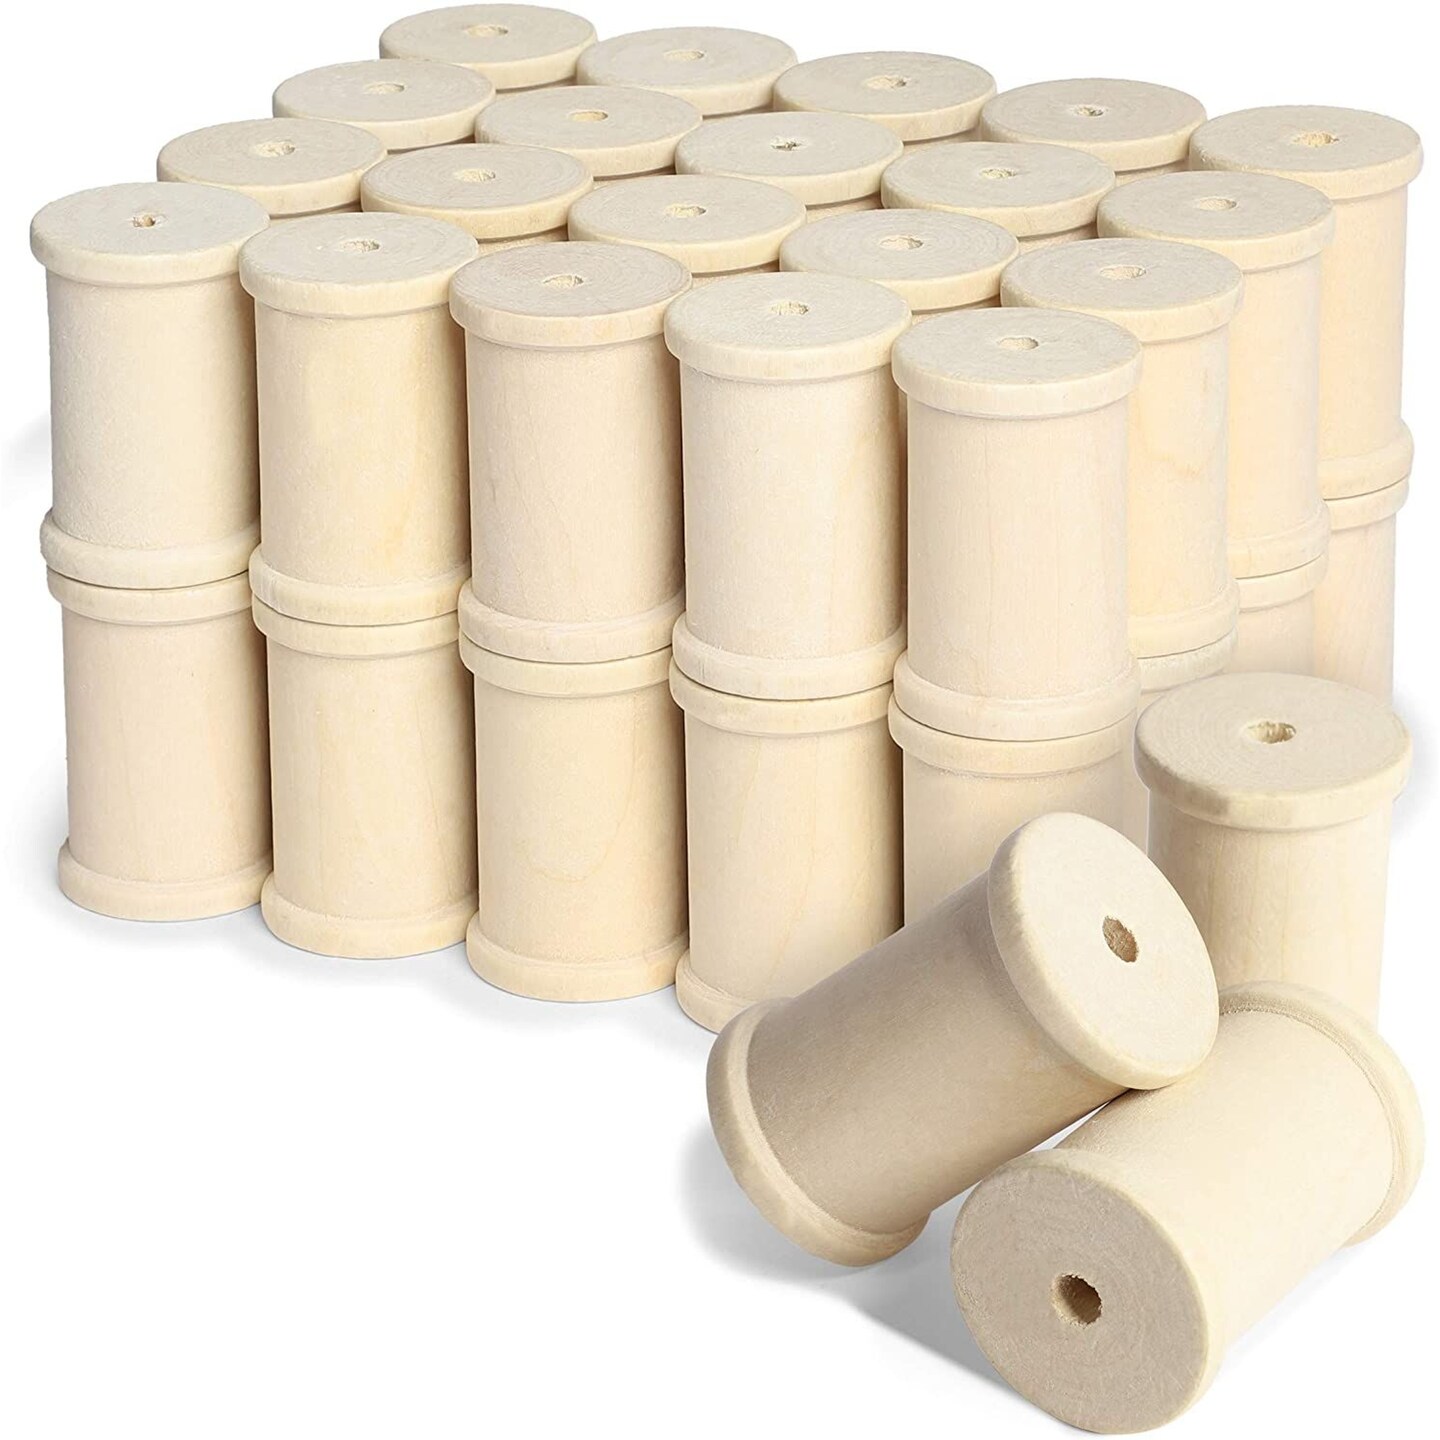 Large Unfinished Wooden Spools for Crafts (1.37 x 2 In, 40 Pack